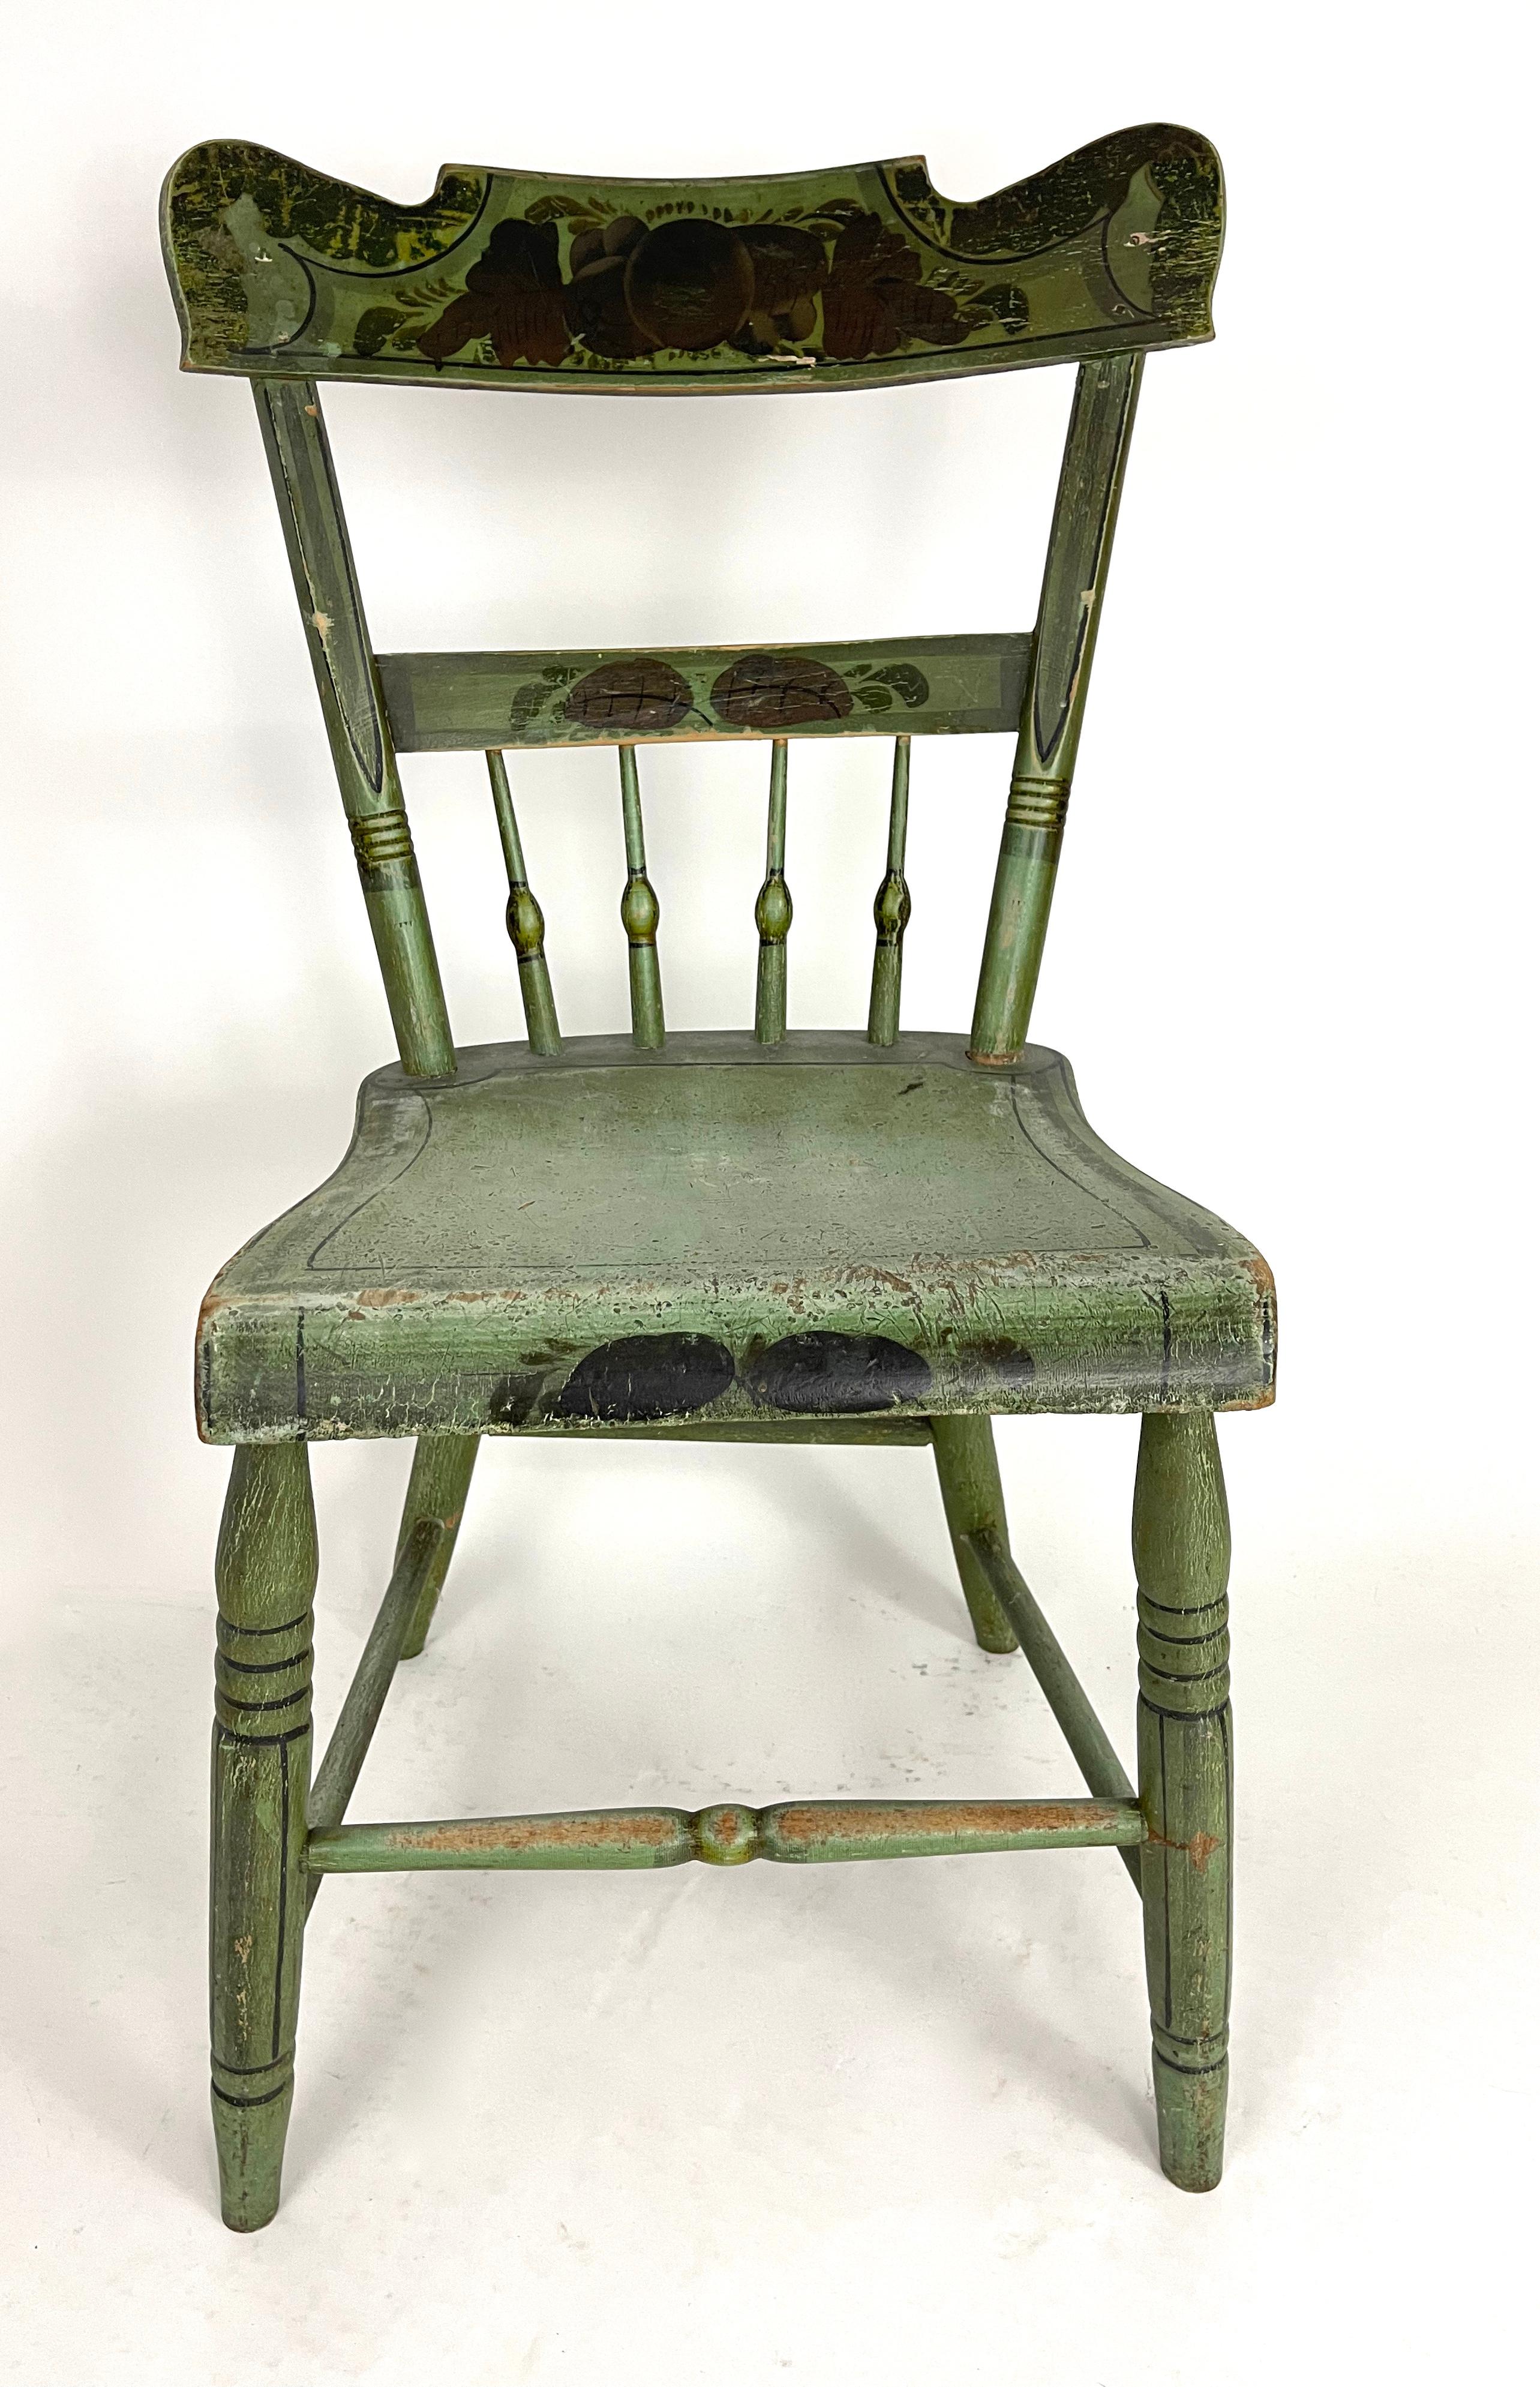 Set of 6 19th Century American Country Green Painted Dining Chairs, c. 1820-30 2